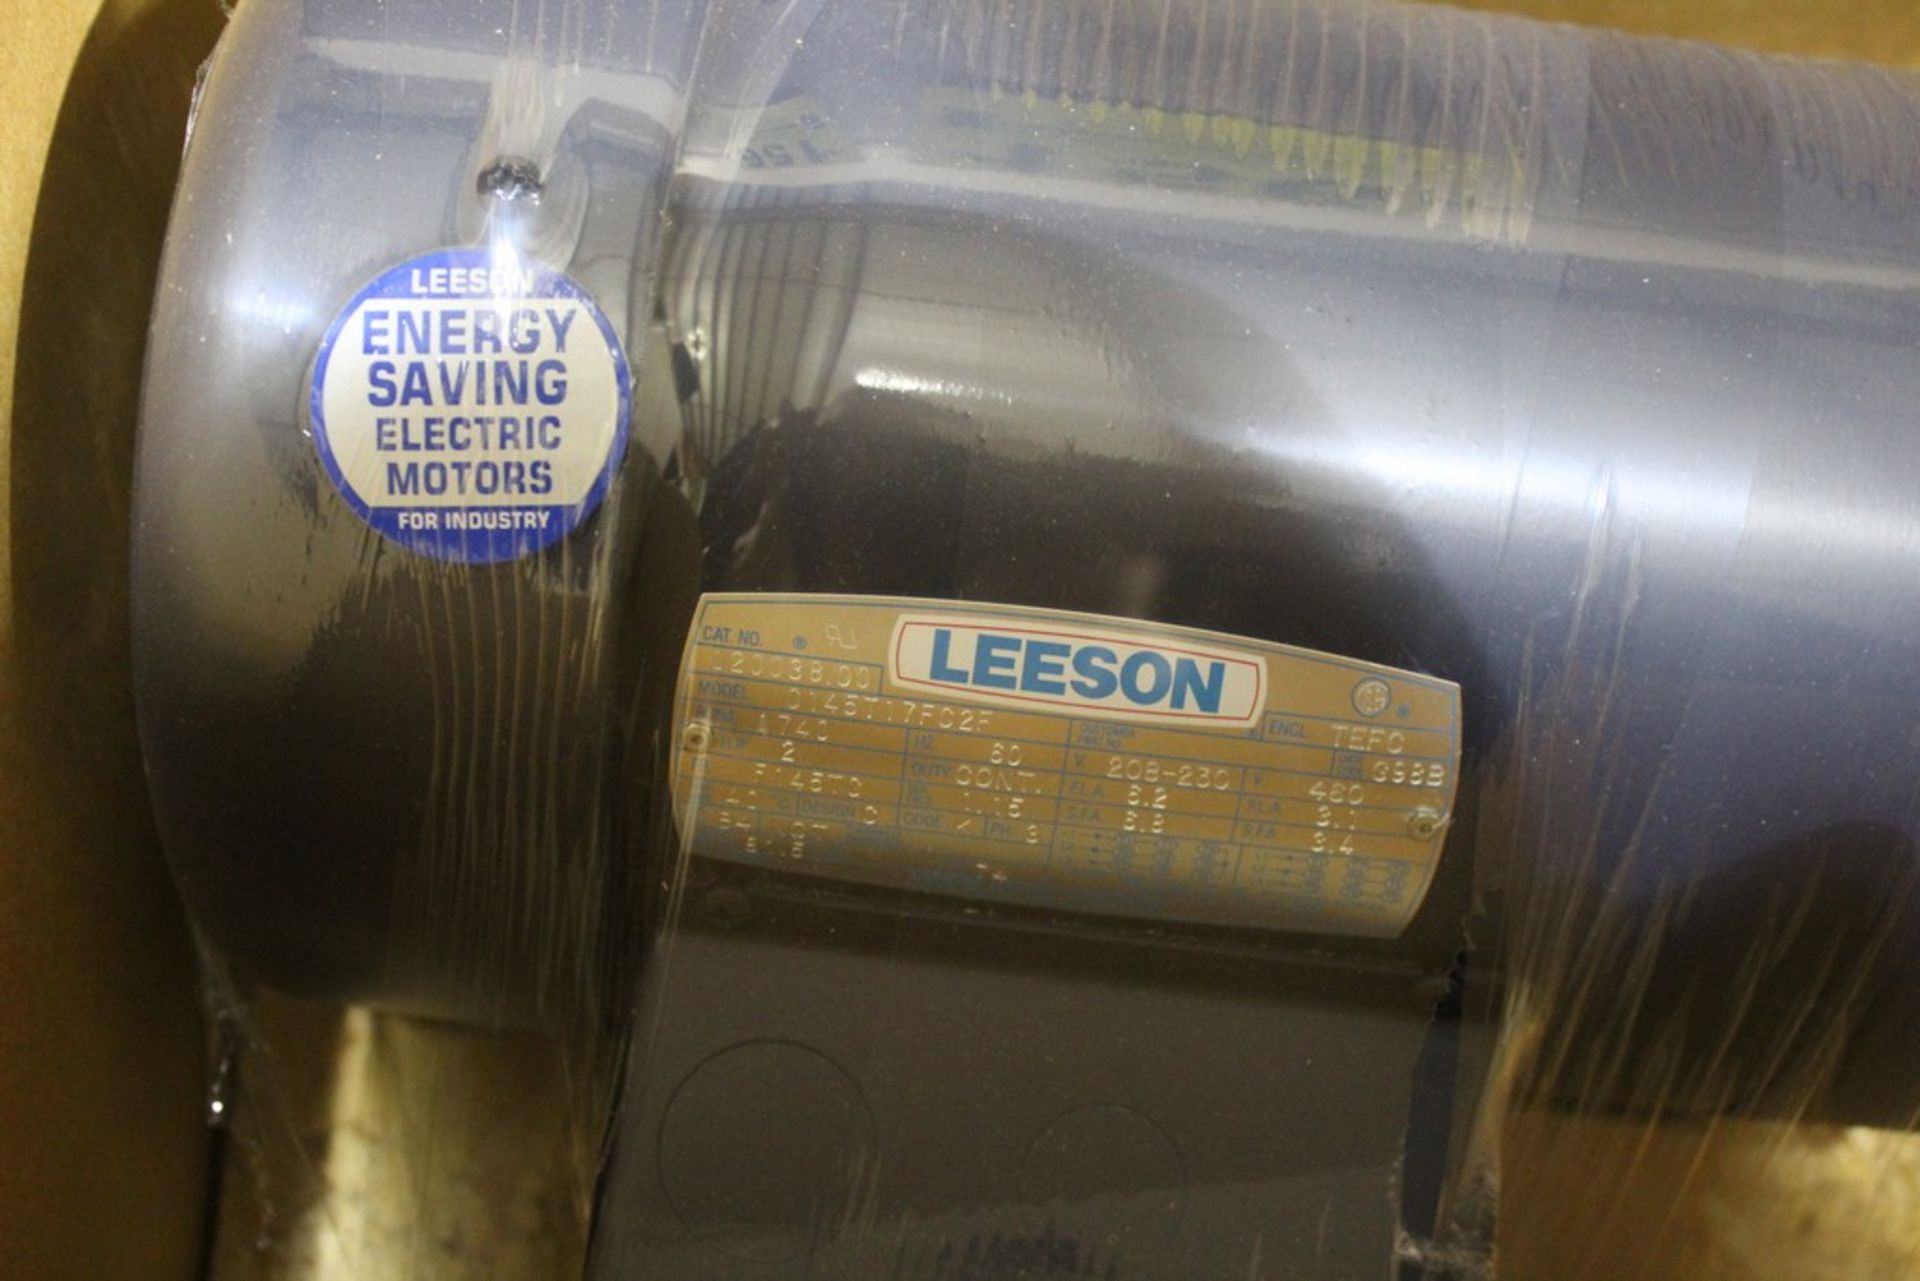 LEESON 2 HORSEPOWER THREE PHASE ELECTRIC MOTOR (APPEARS NEW) - Image 2 of 2